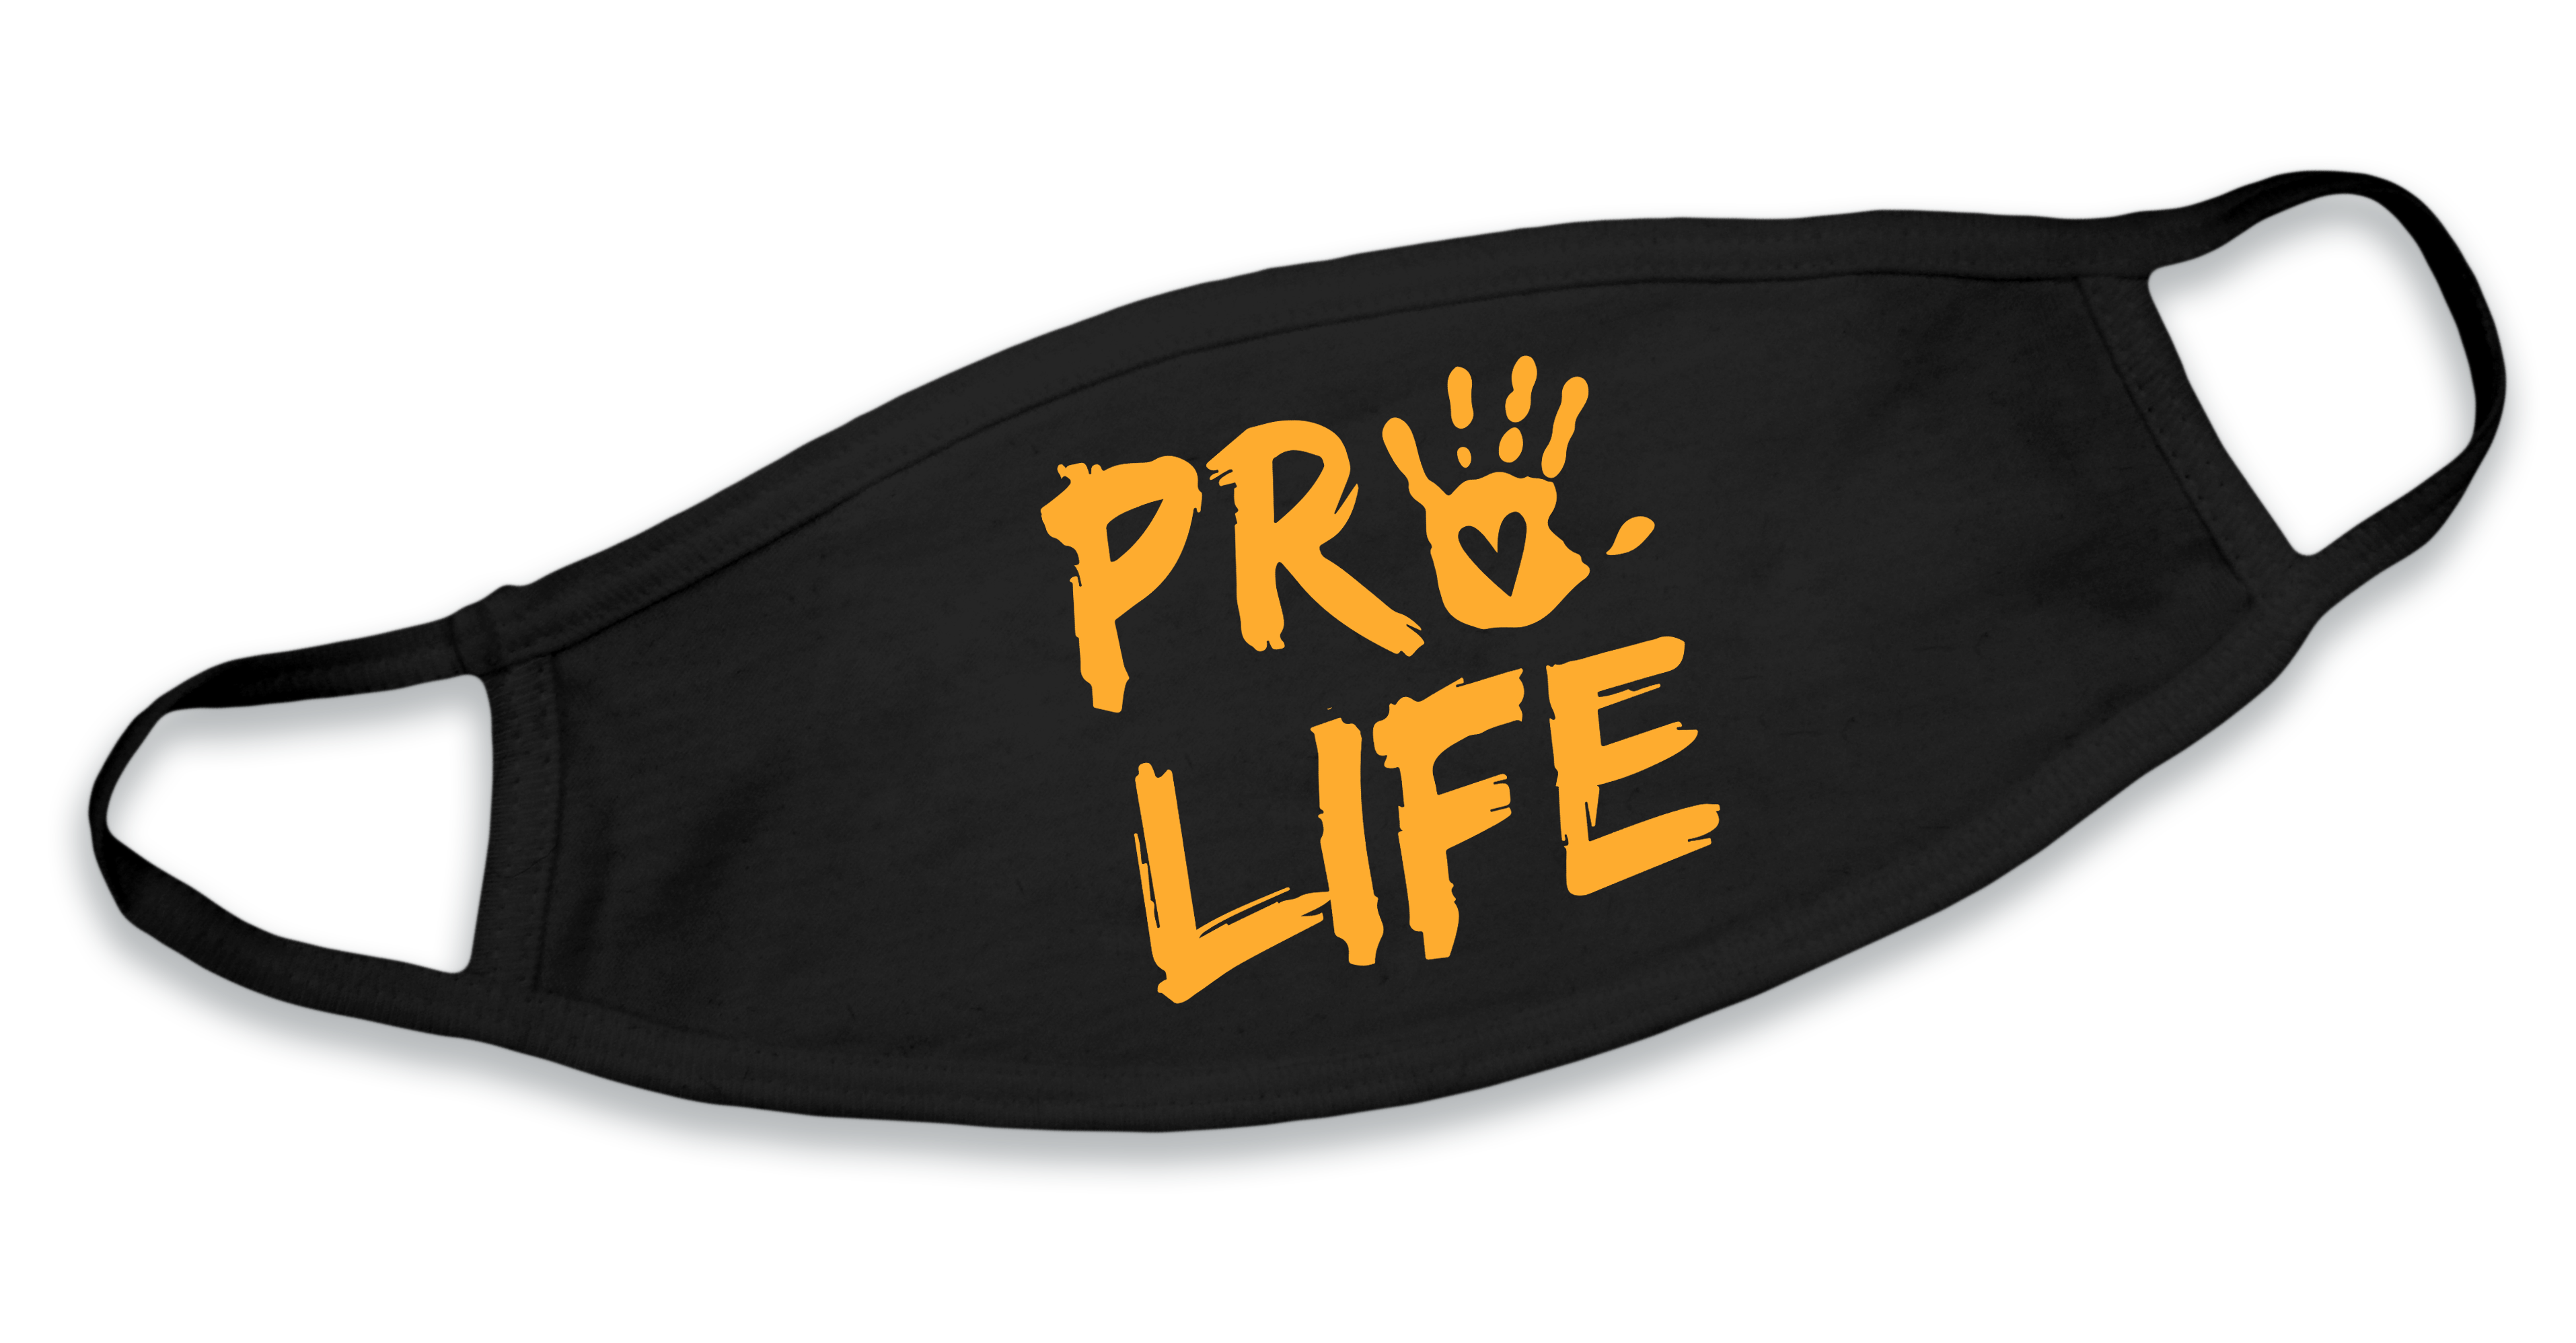 Pro Life with Handprint Face Mask